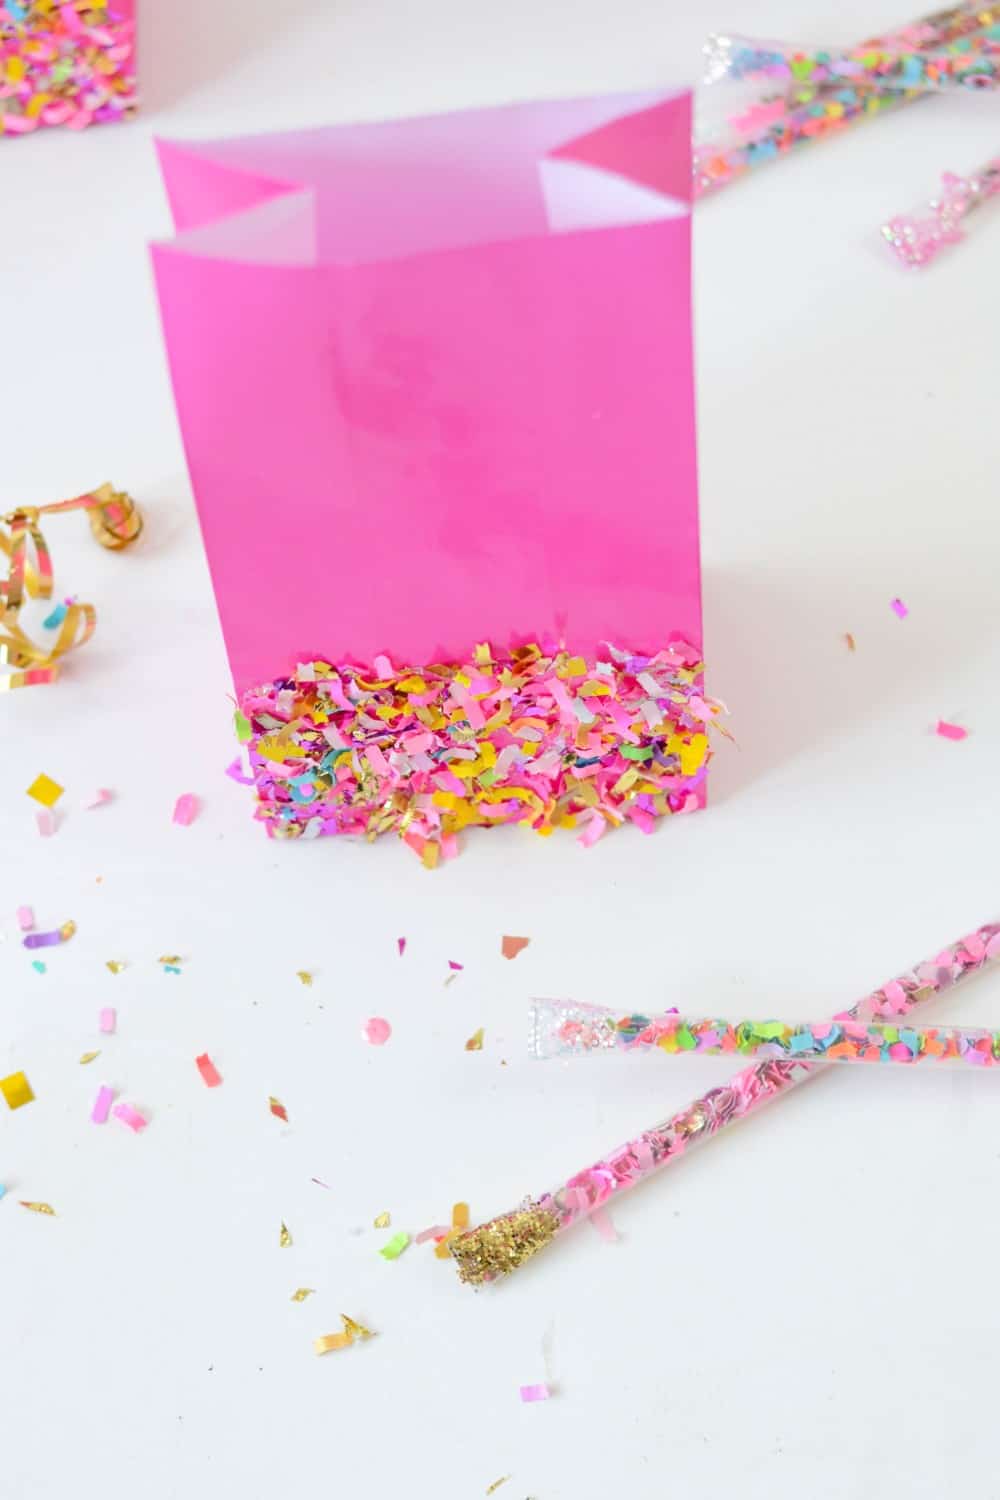 DIY loot bags made with confetti